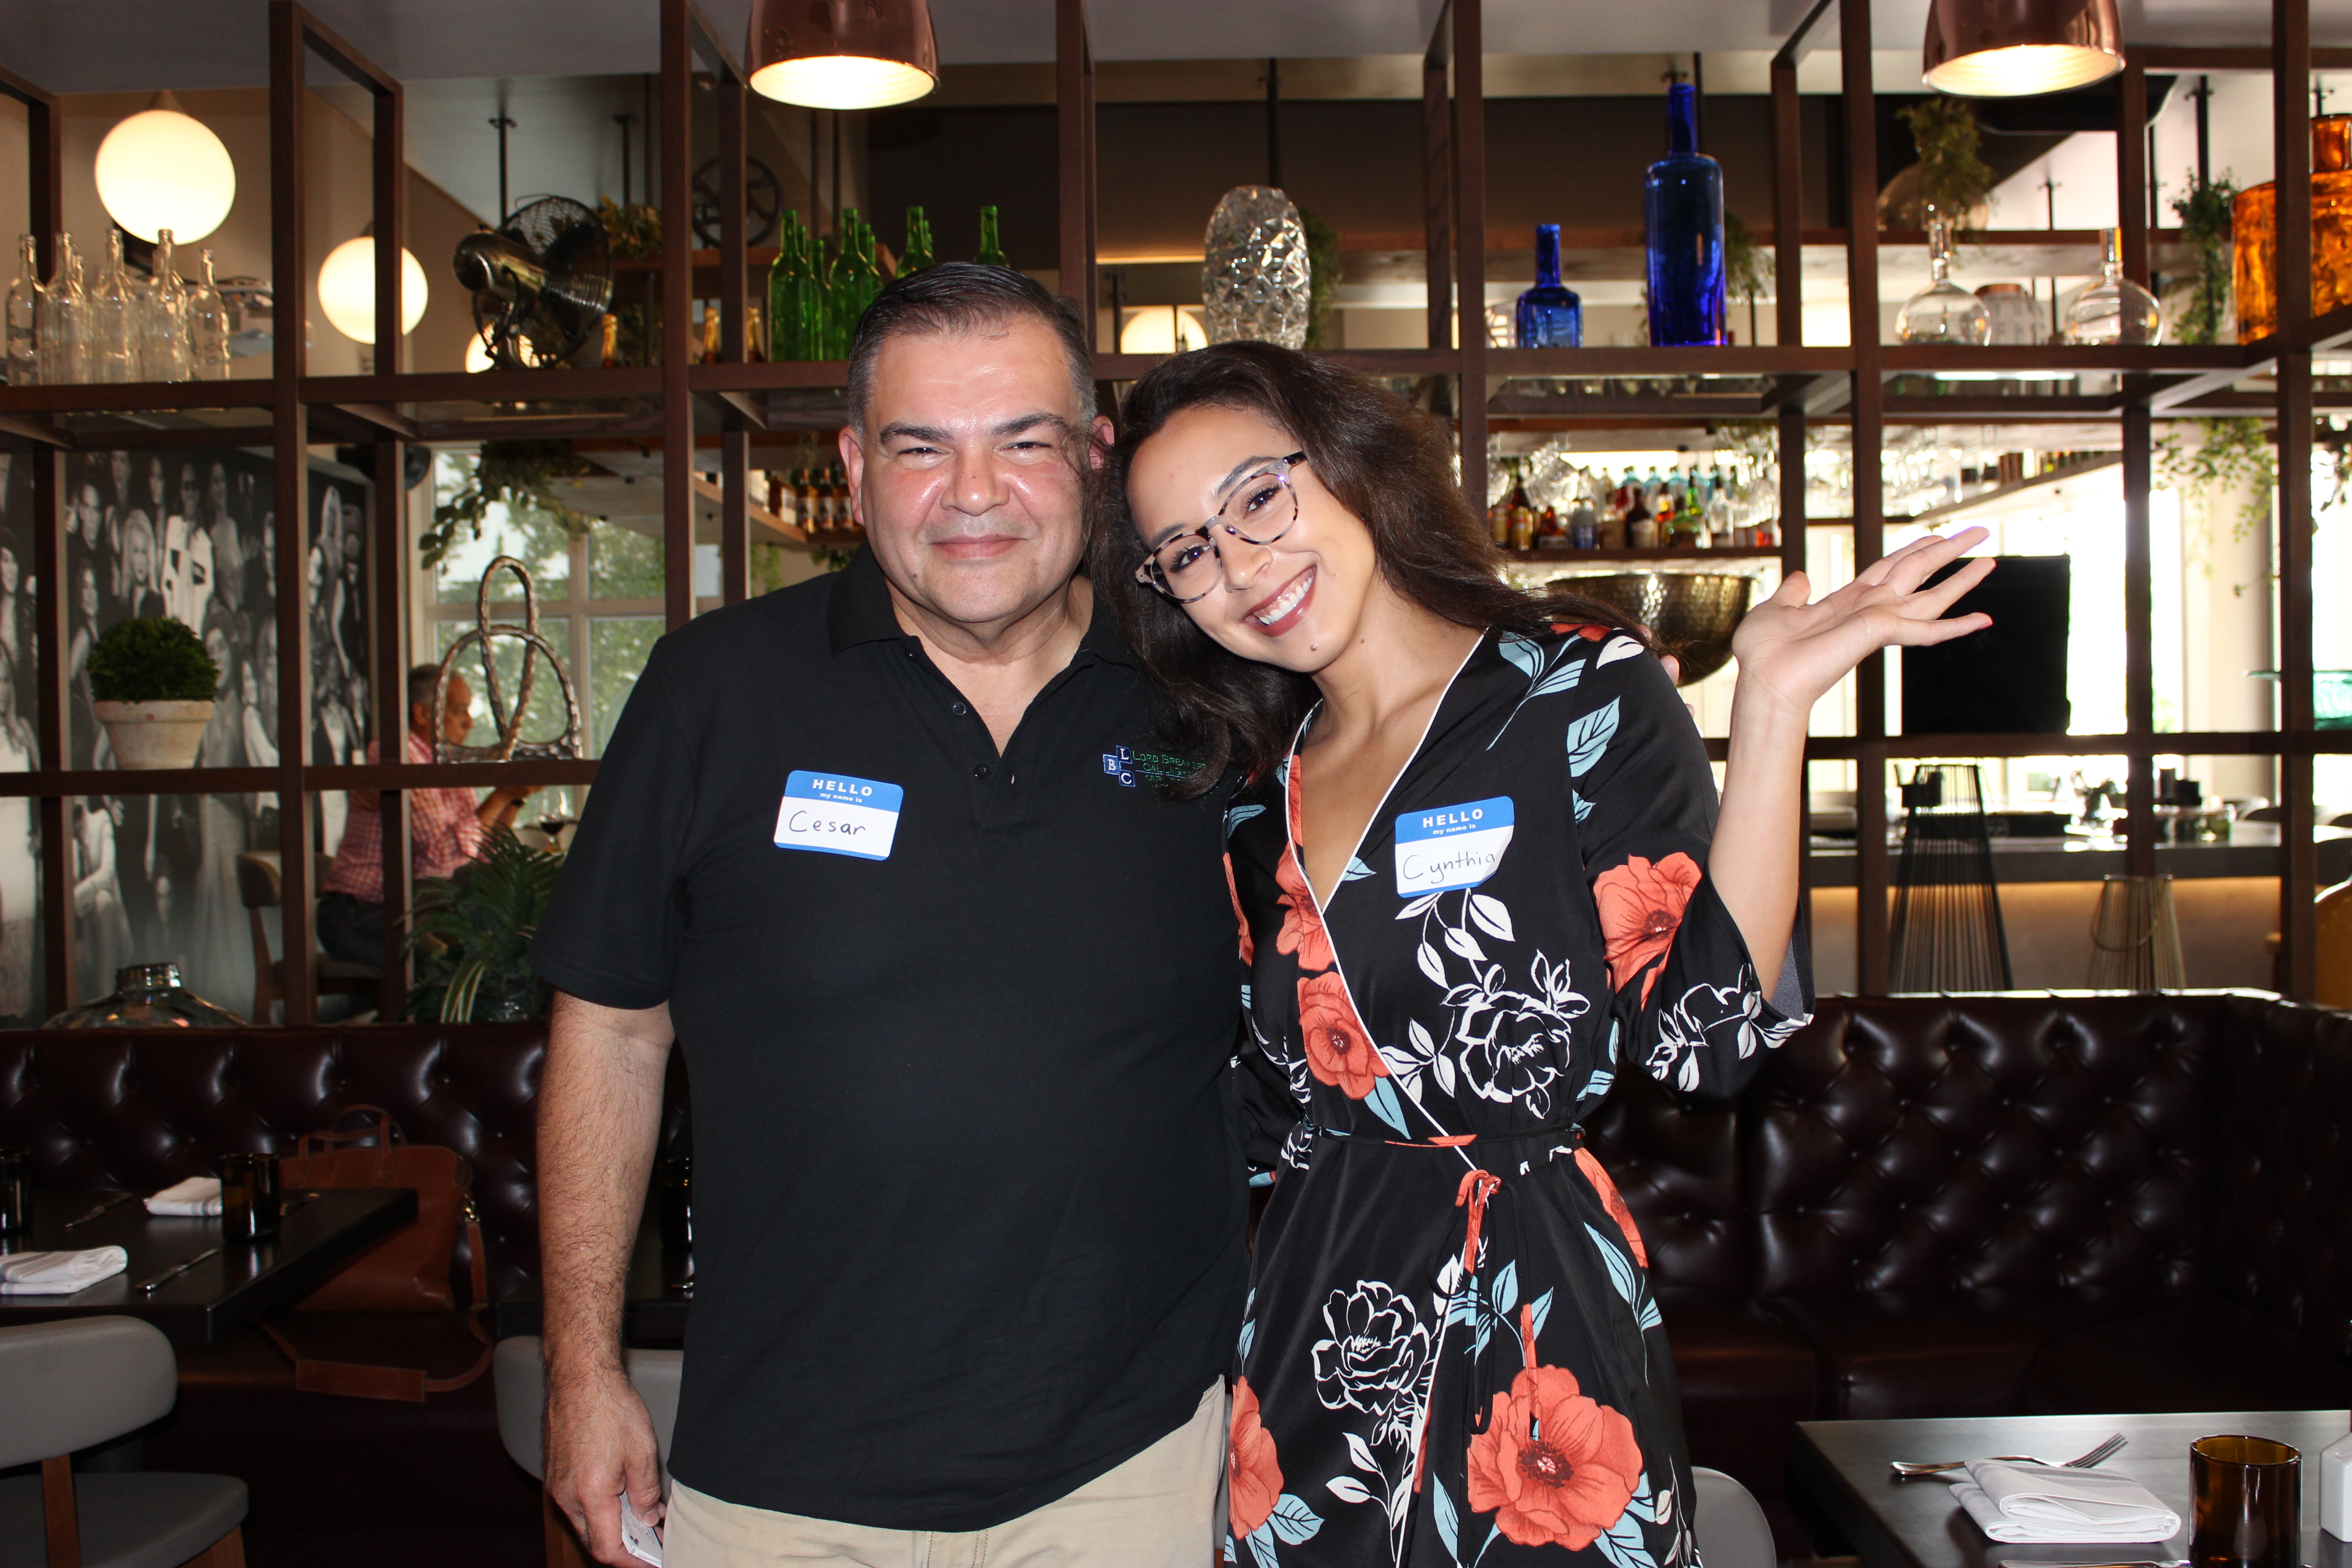 Doral Chamber of Commerce introduces Cesar and Cynthia in Gusto Ristobar Luncheon.